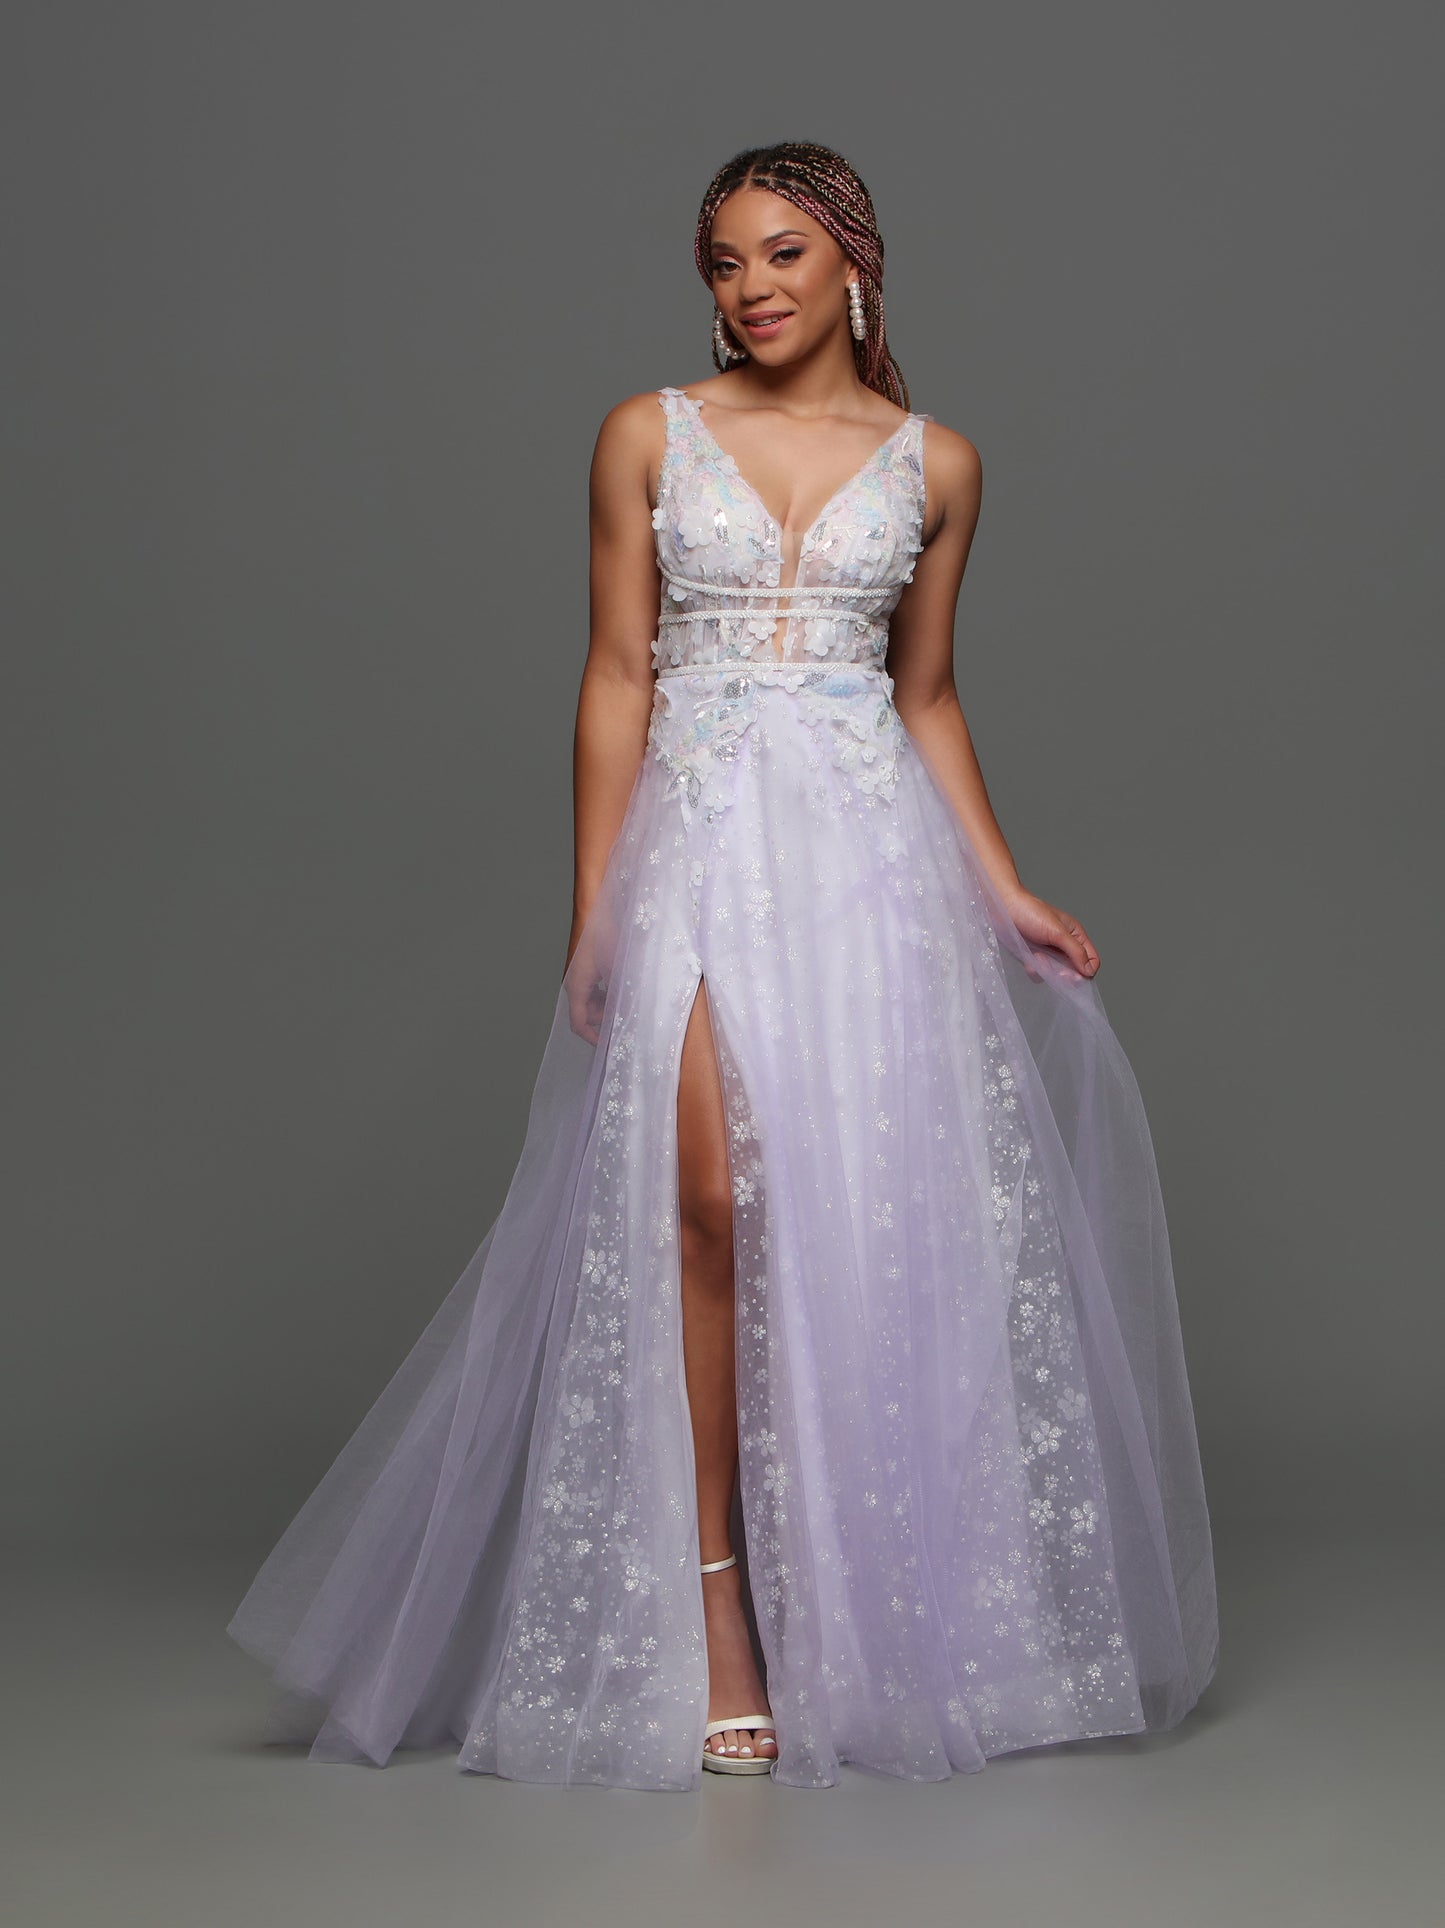 Get ready to turn heads in the Candice Wang 72308 Sheer Shimmer A Line Maxi Slit Prom Dress. The floral pastel design and sheer fabric create a breathtaking effect, while the A-line silhouette and high leg slit offer a flattering fit. Perfect for any formal occasion, this gown will make you feel confident and elegant.